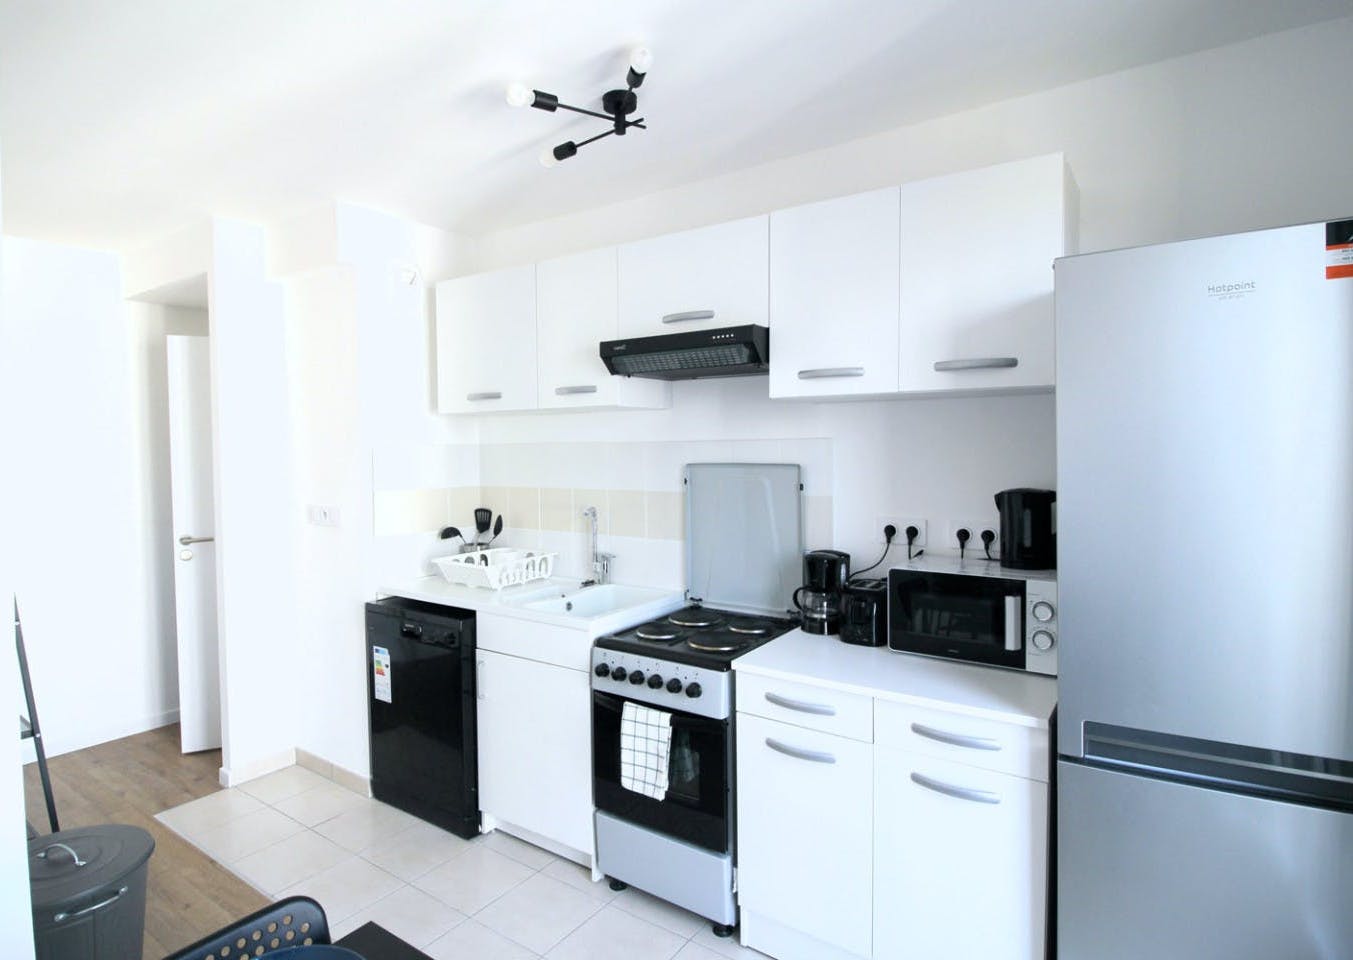 Beautiful apartment near the center of Clichy